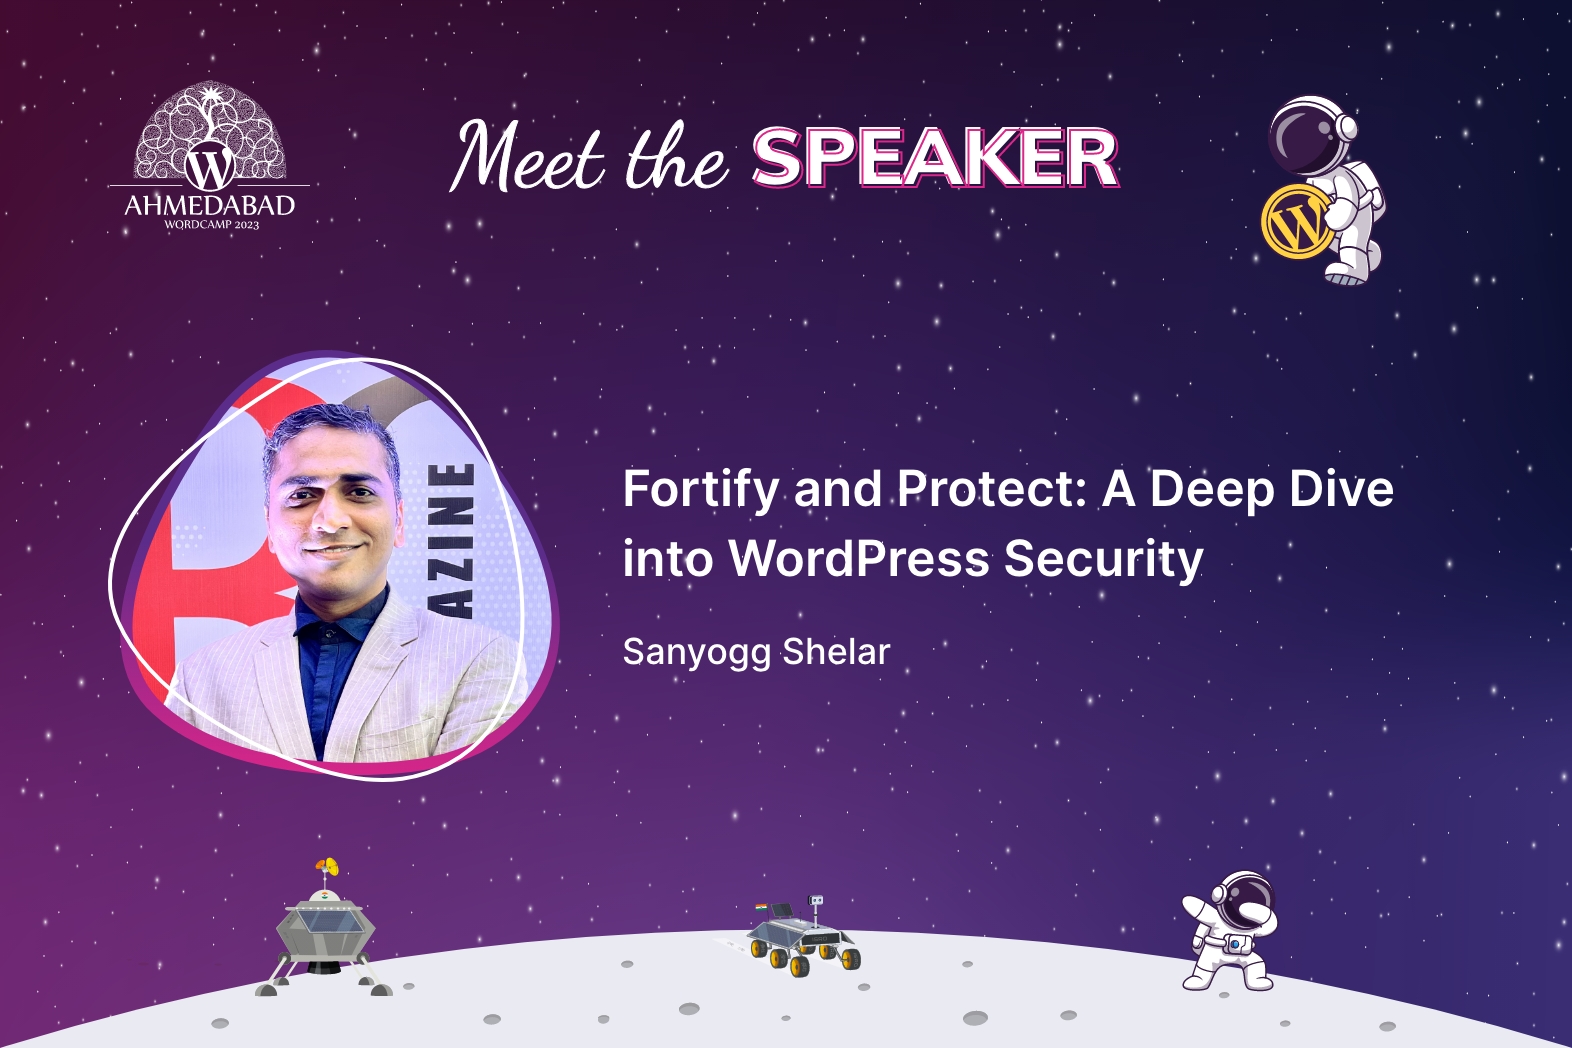 Fortify and Protect: A Deep Dive into WordPress Security By Sanyogg Shelar